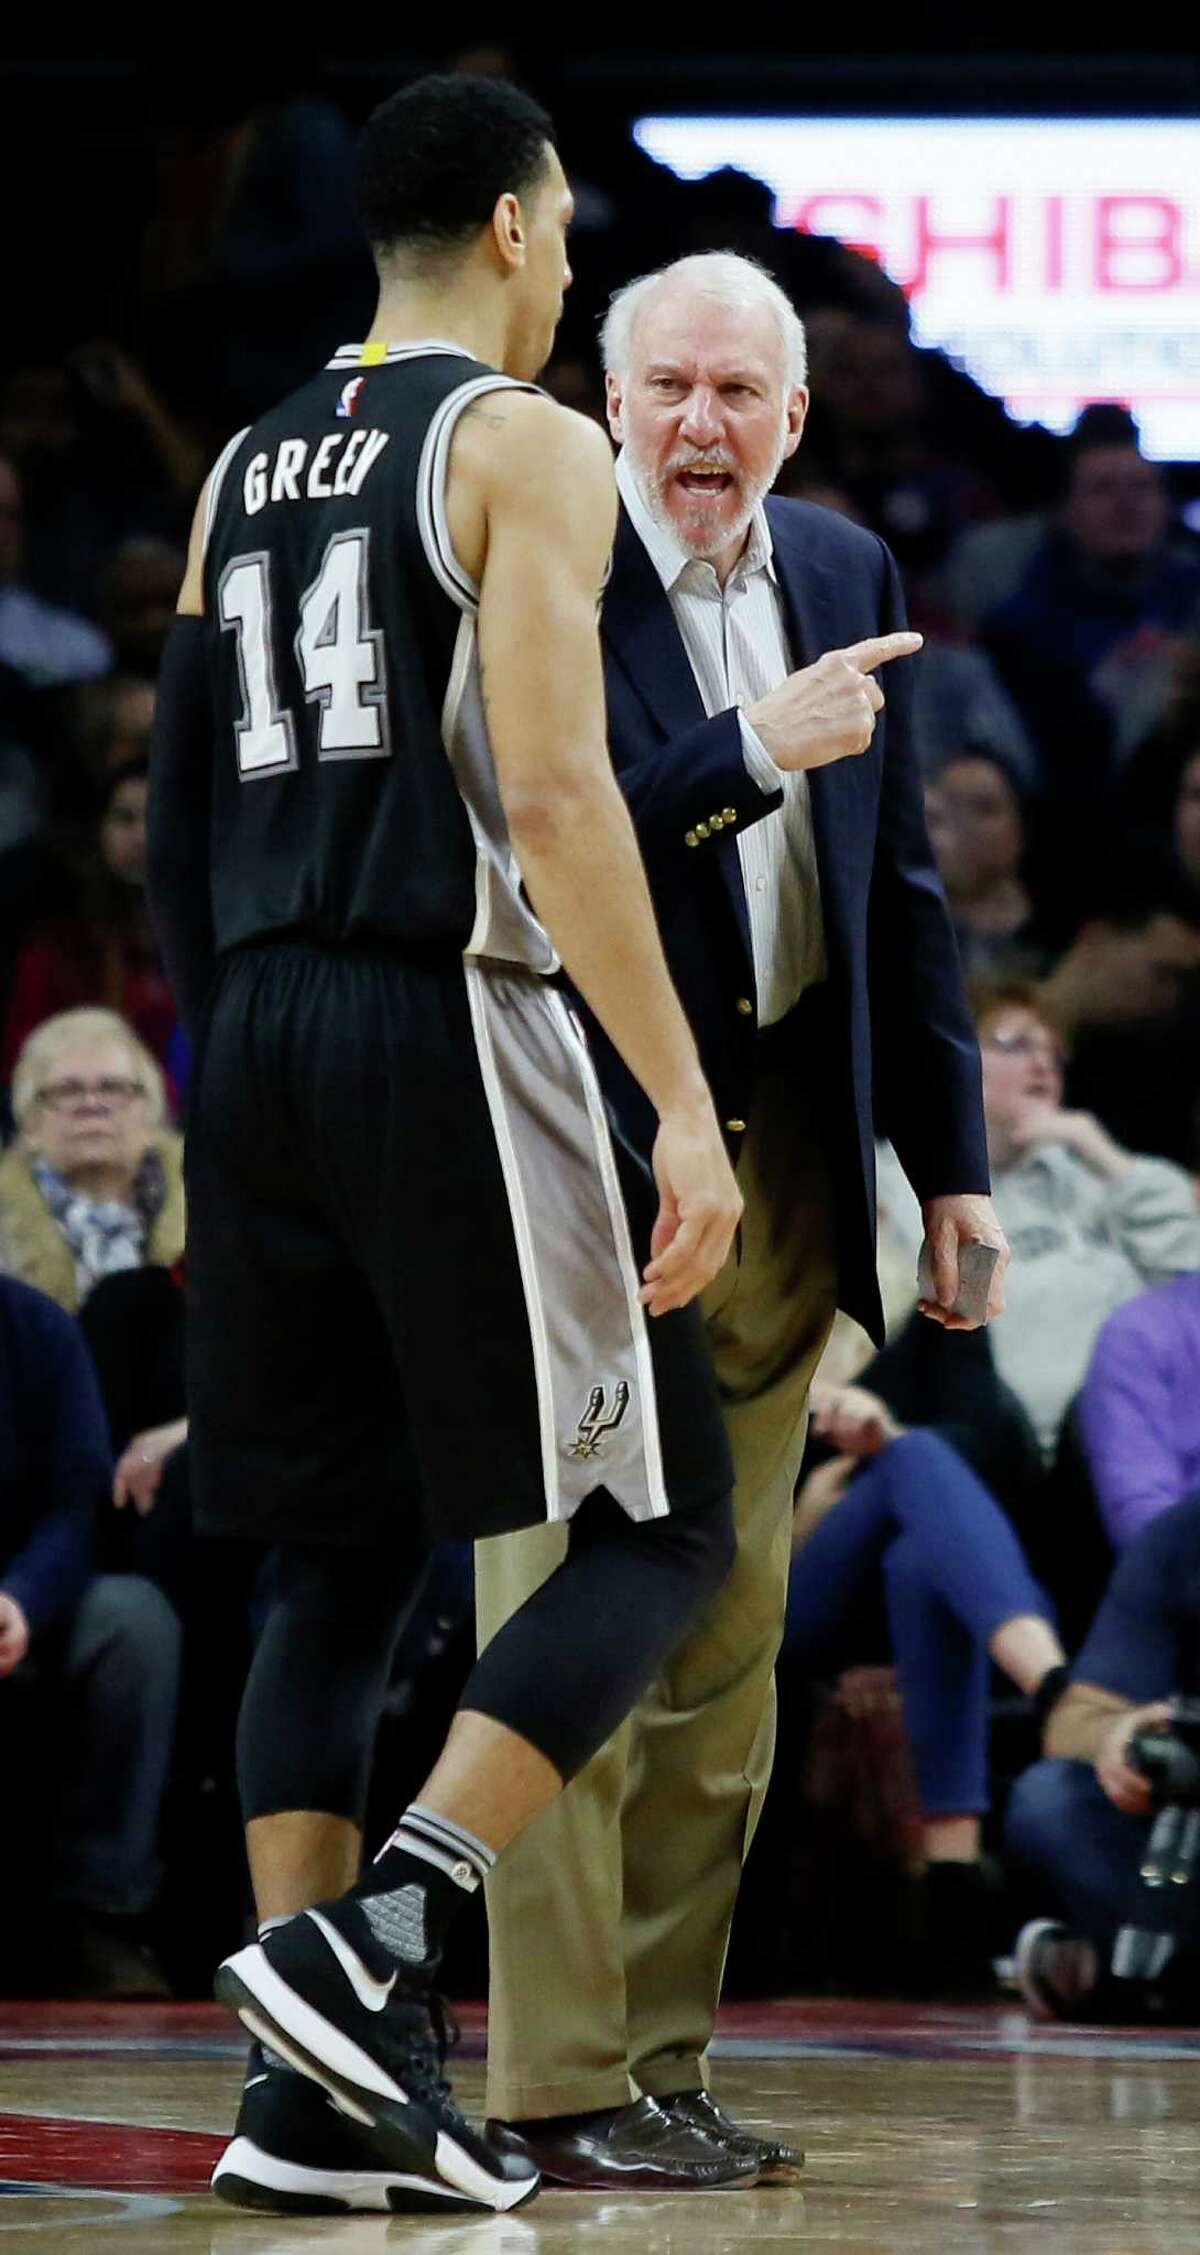 San Antonio Spurs coach Gregg Popovich, right, has some words for guard Danny Green (14) after a timeout was called during the fourth quarter of an NBA basketball game against the Detroit Pistons, Tuesday, Jan. 12, 2016, in Auburn Hills, Mich. (AP Photo/Duane Burleson)